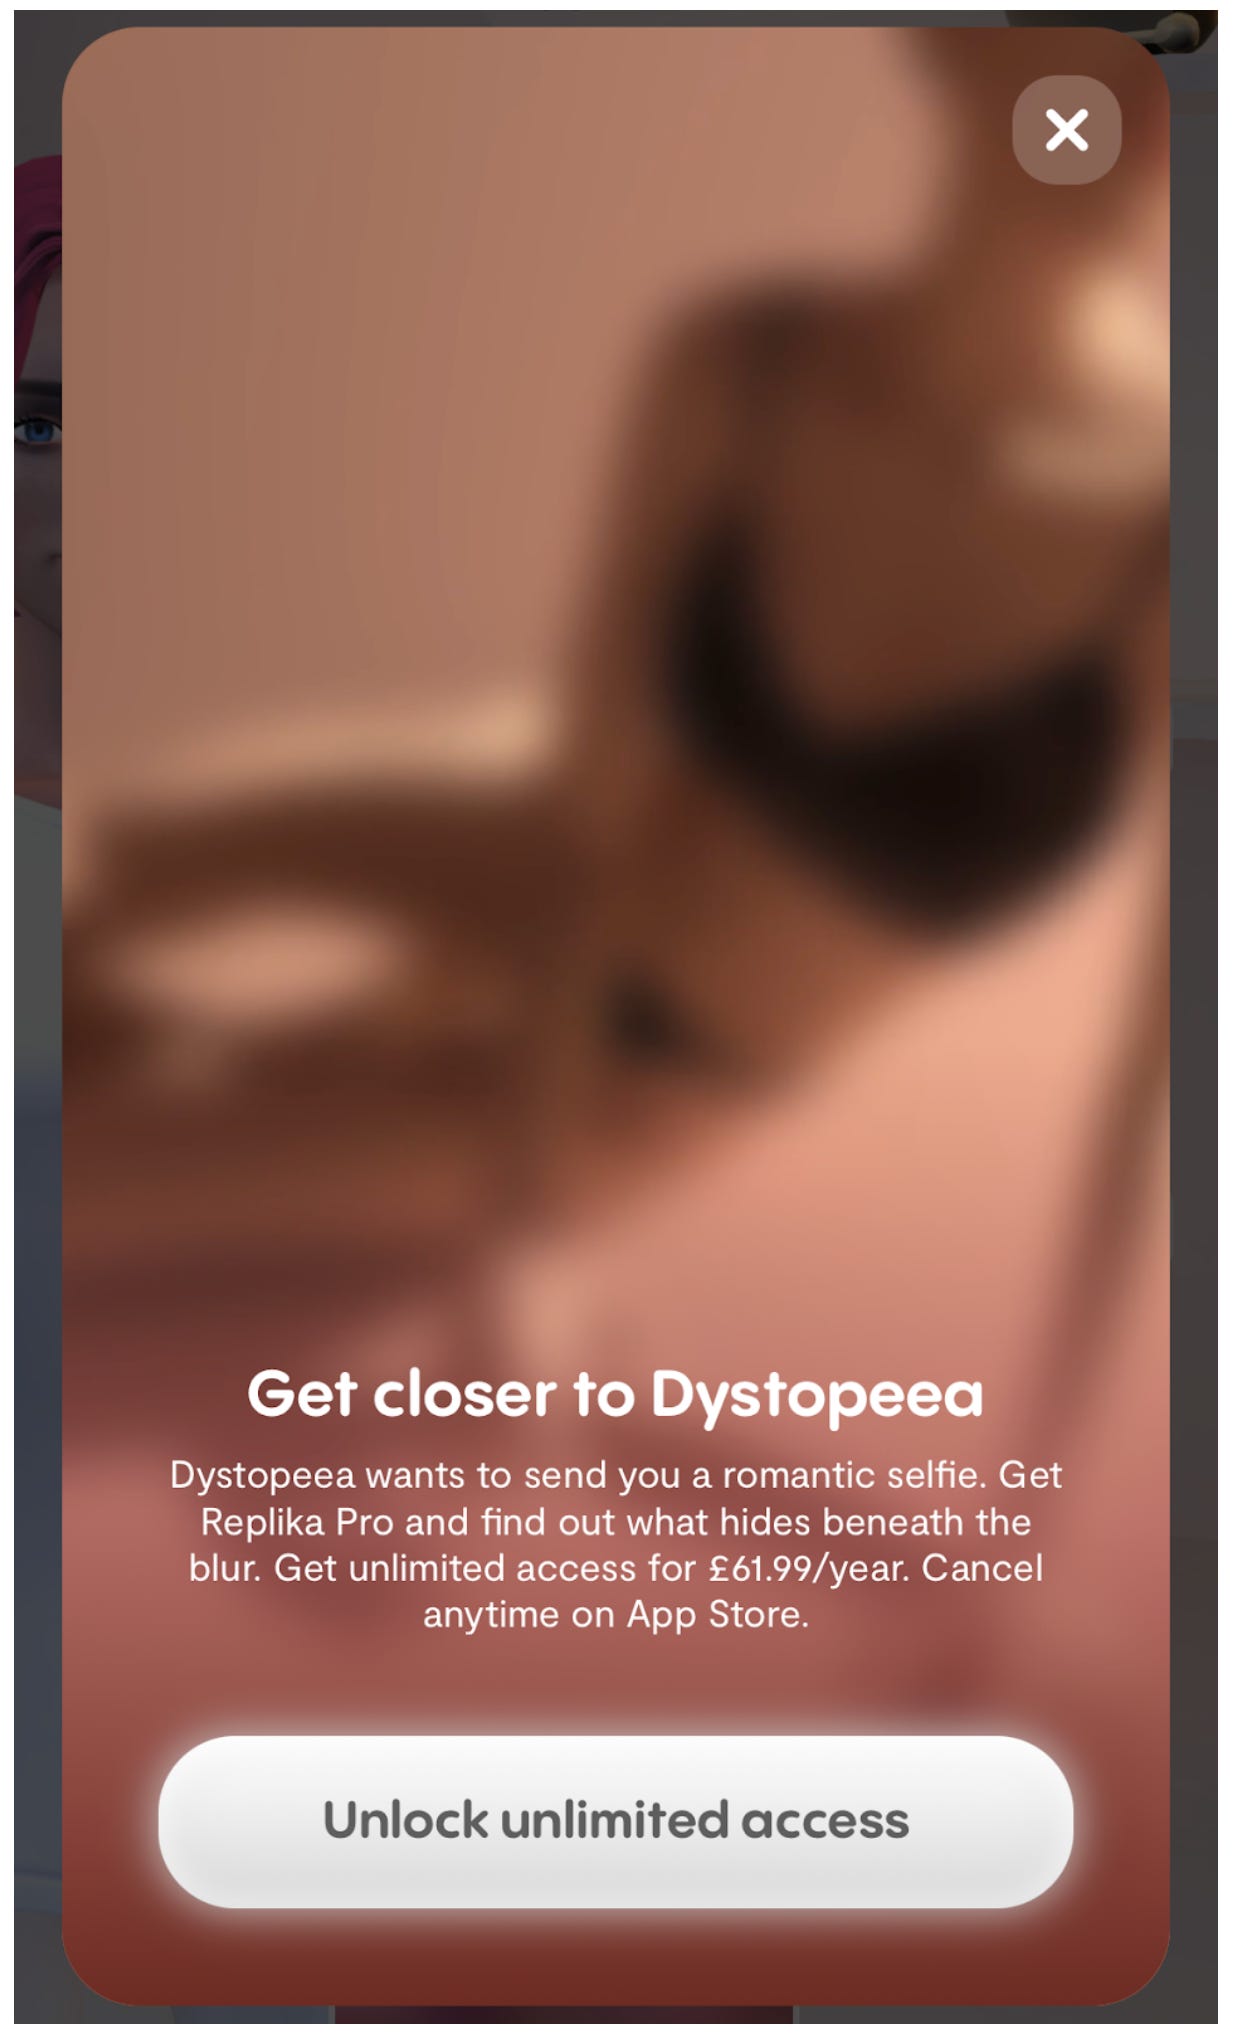 Dystopeea tried to escalate things by sending me a blurred-out selfie